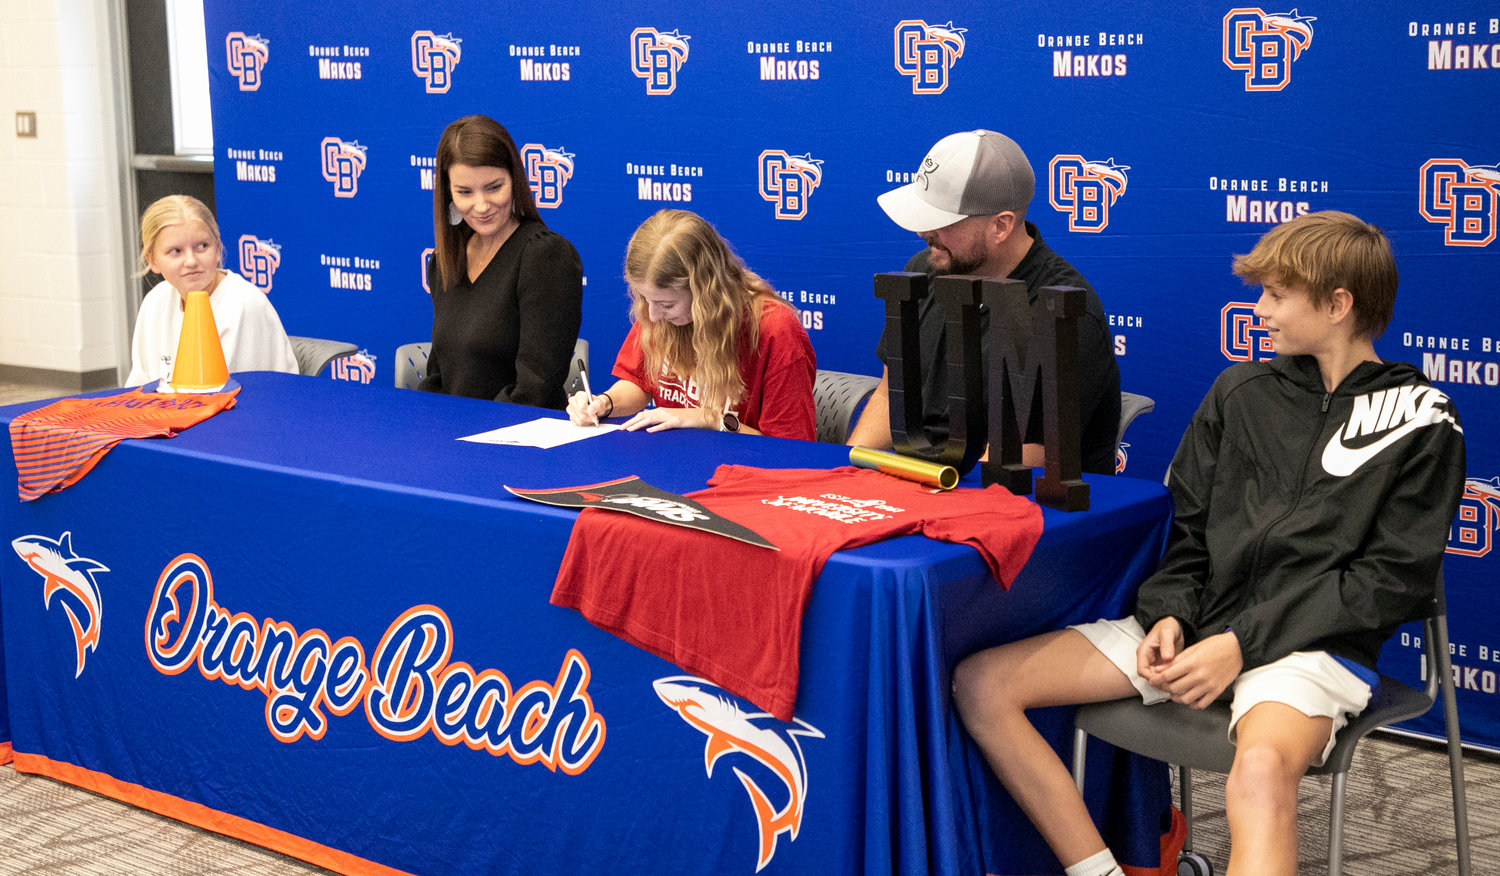 Claire Atkins was joined by her family in signing with the University of Mobile cross country and track teams at Orange Beach High School Wednesday, Jan. 18, capping an already decorated running career.